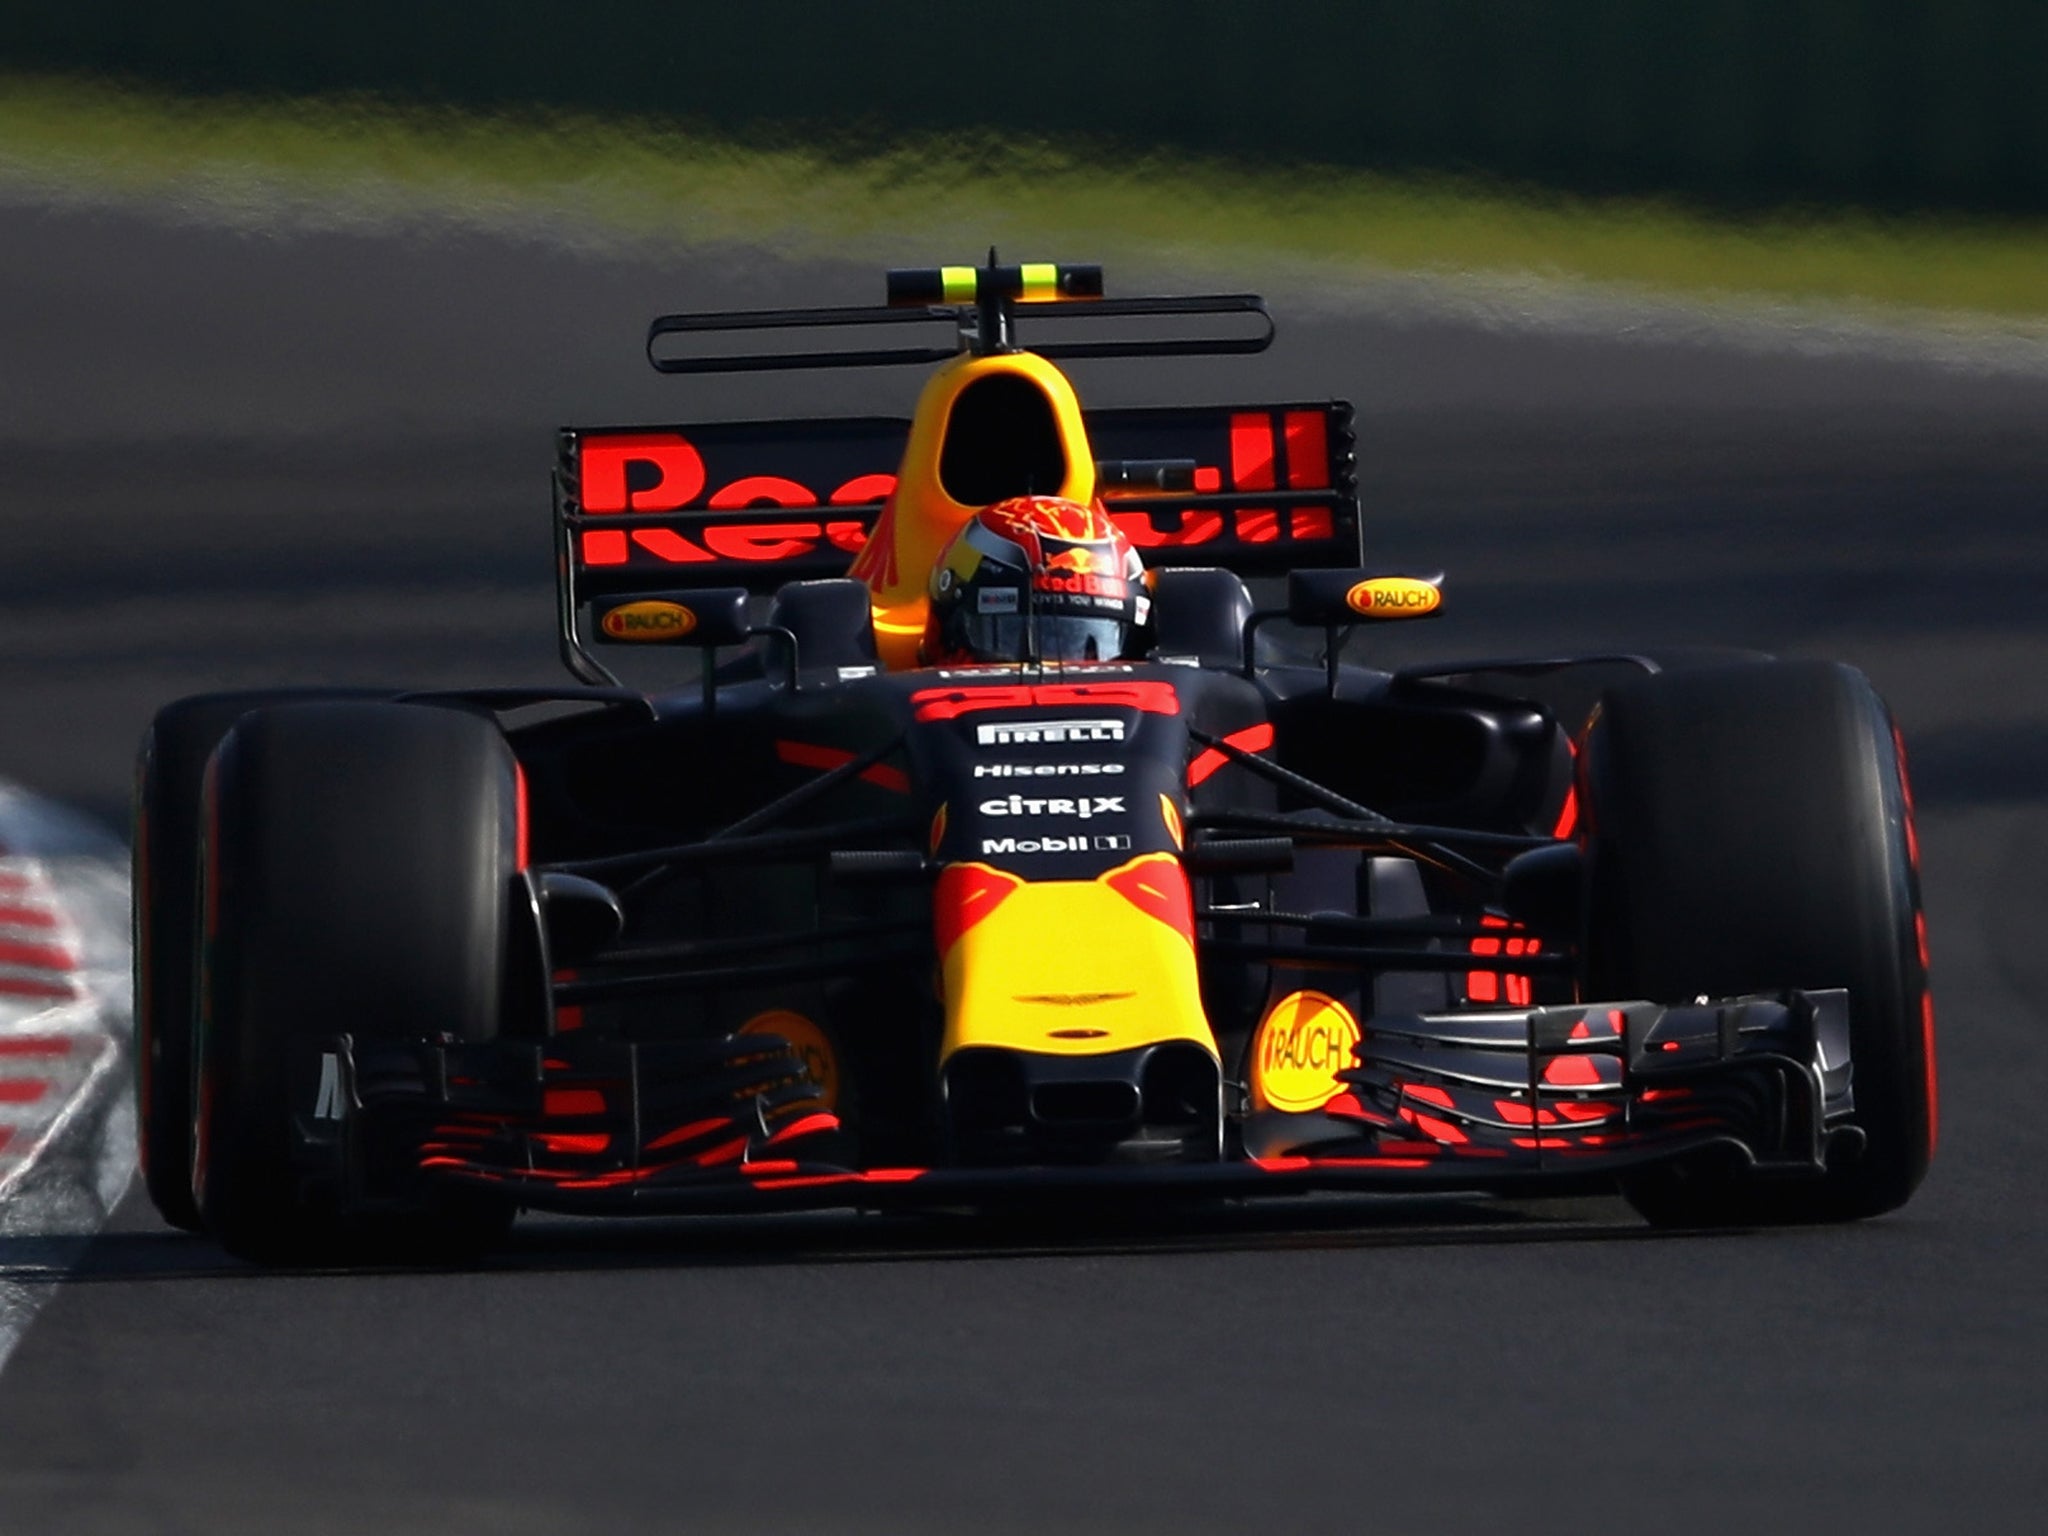 Verstappen looked on course for pole until he was pipped at the final hurdle